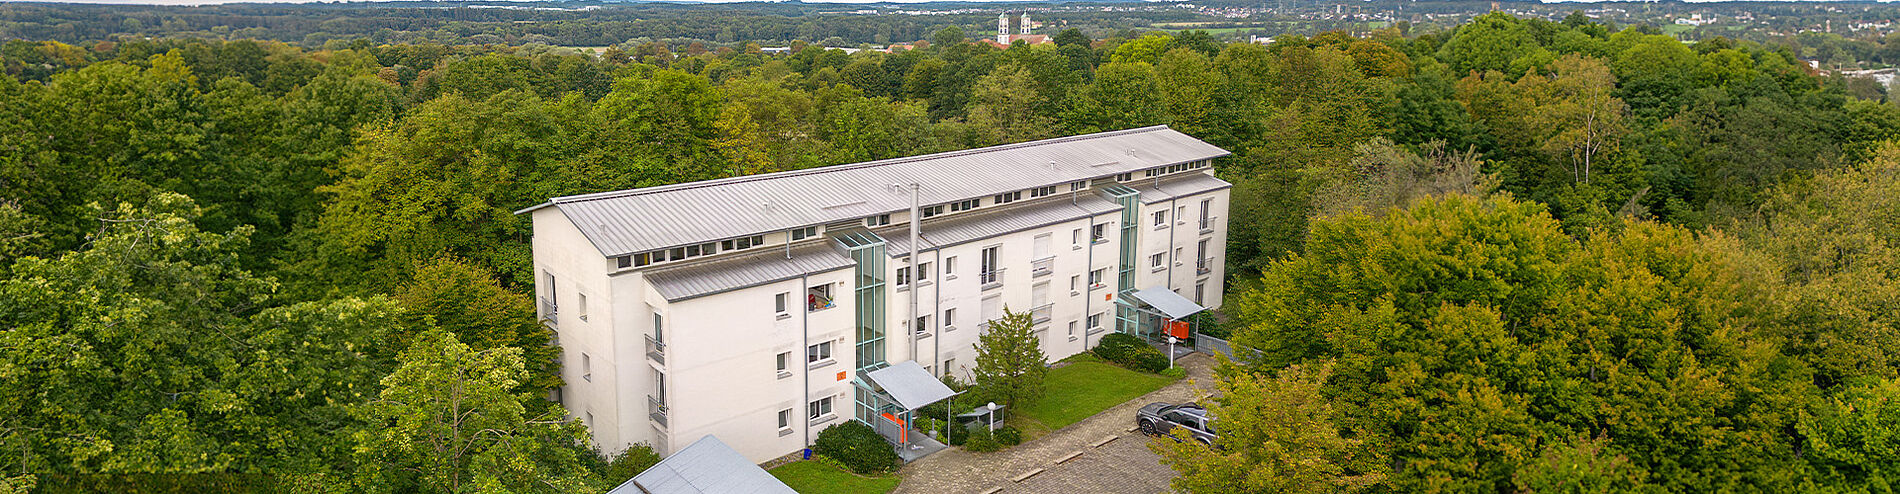 Aerial view of the Weingartshof residential complex in the forest